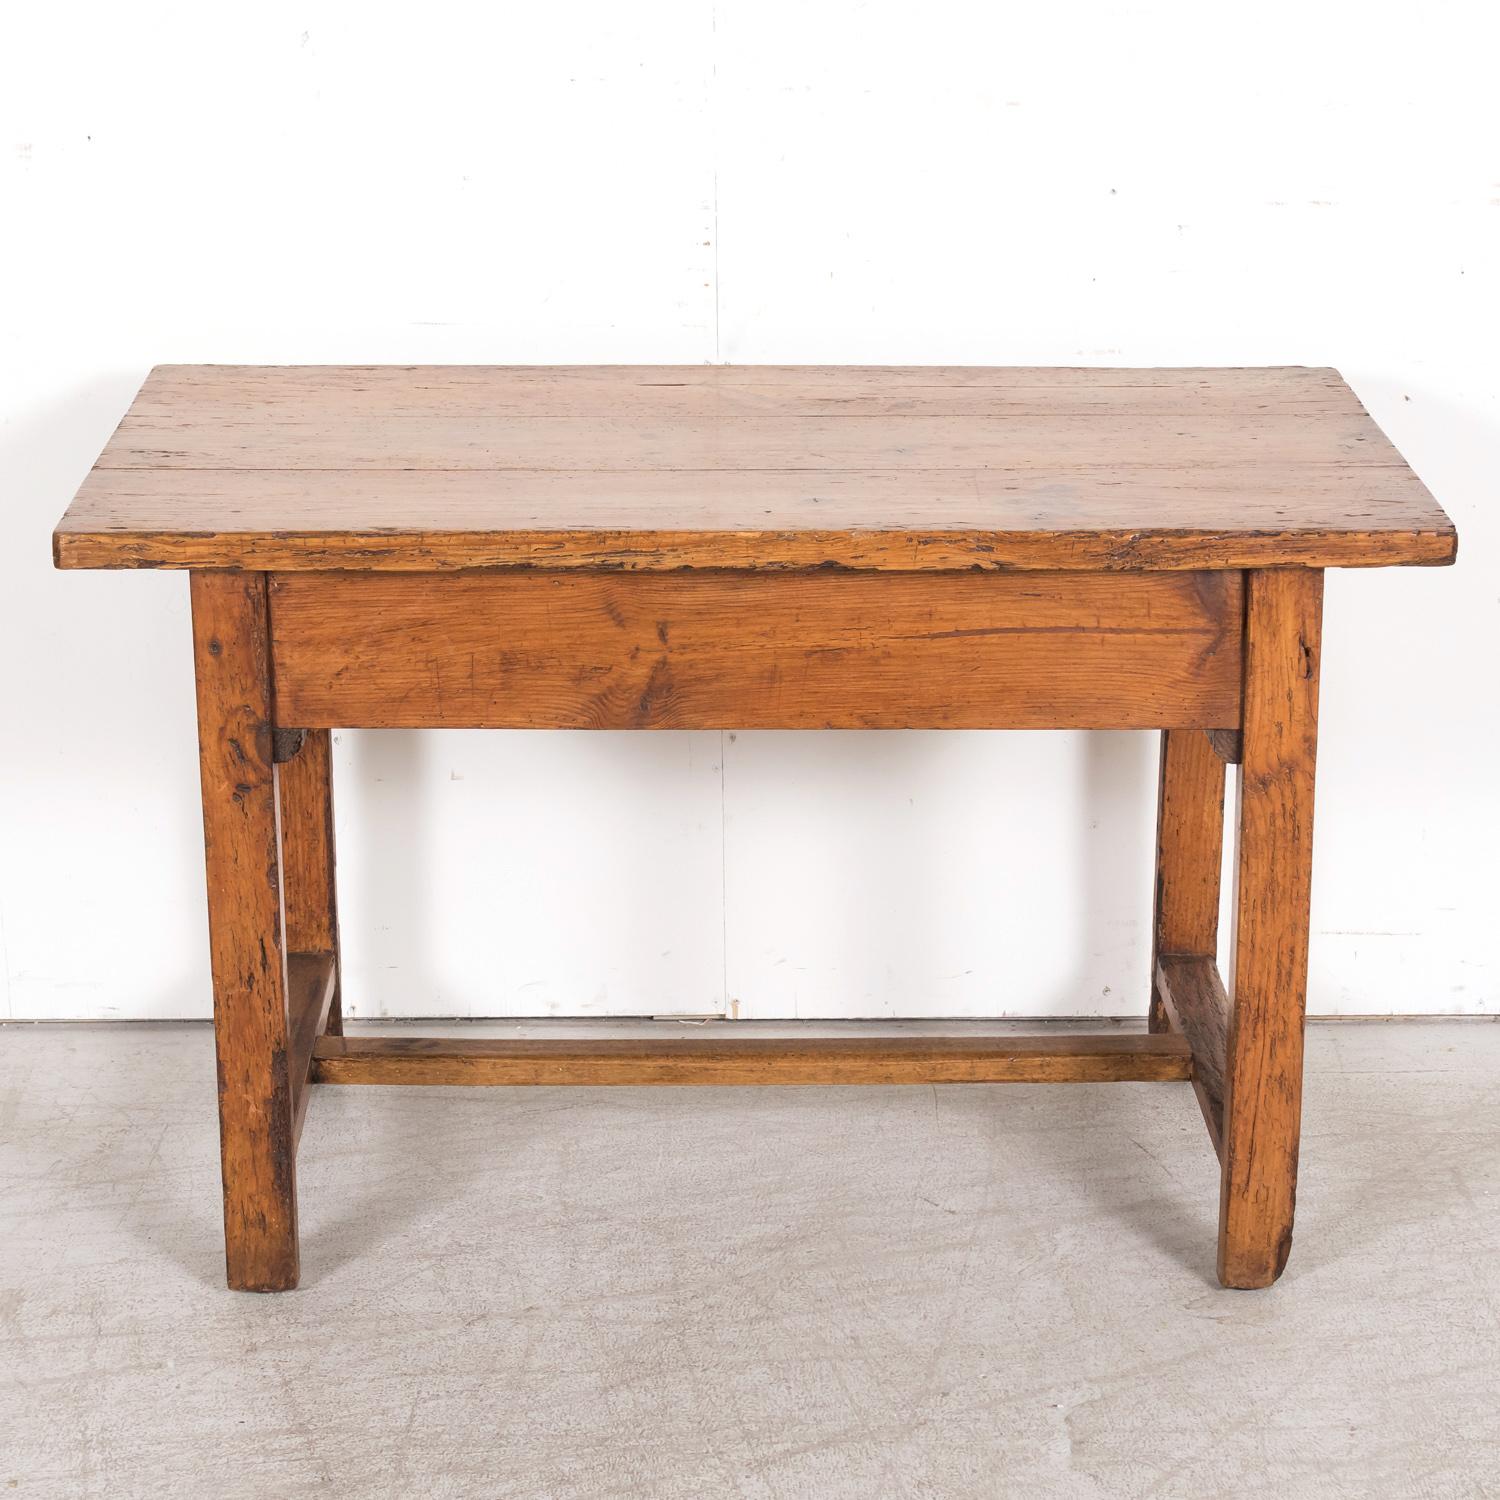 18th Century French Provincial Primitive Larch Wood Side Table or Desk with Draw For Sale 15